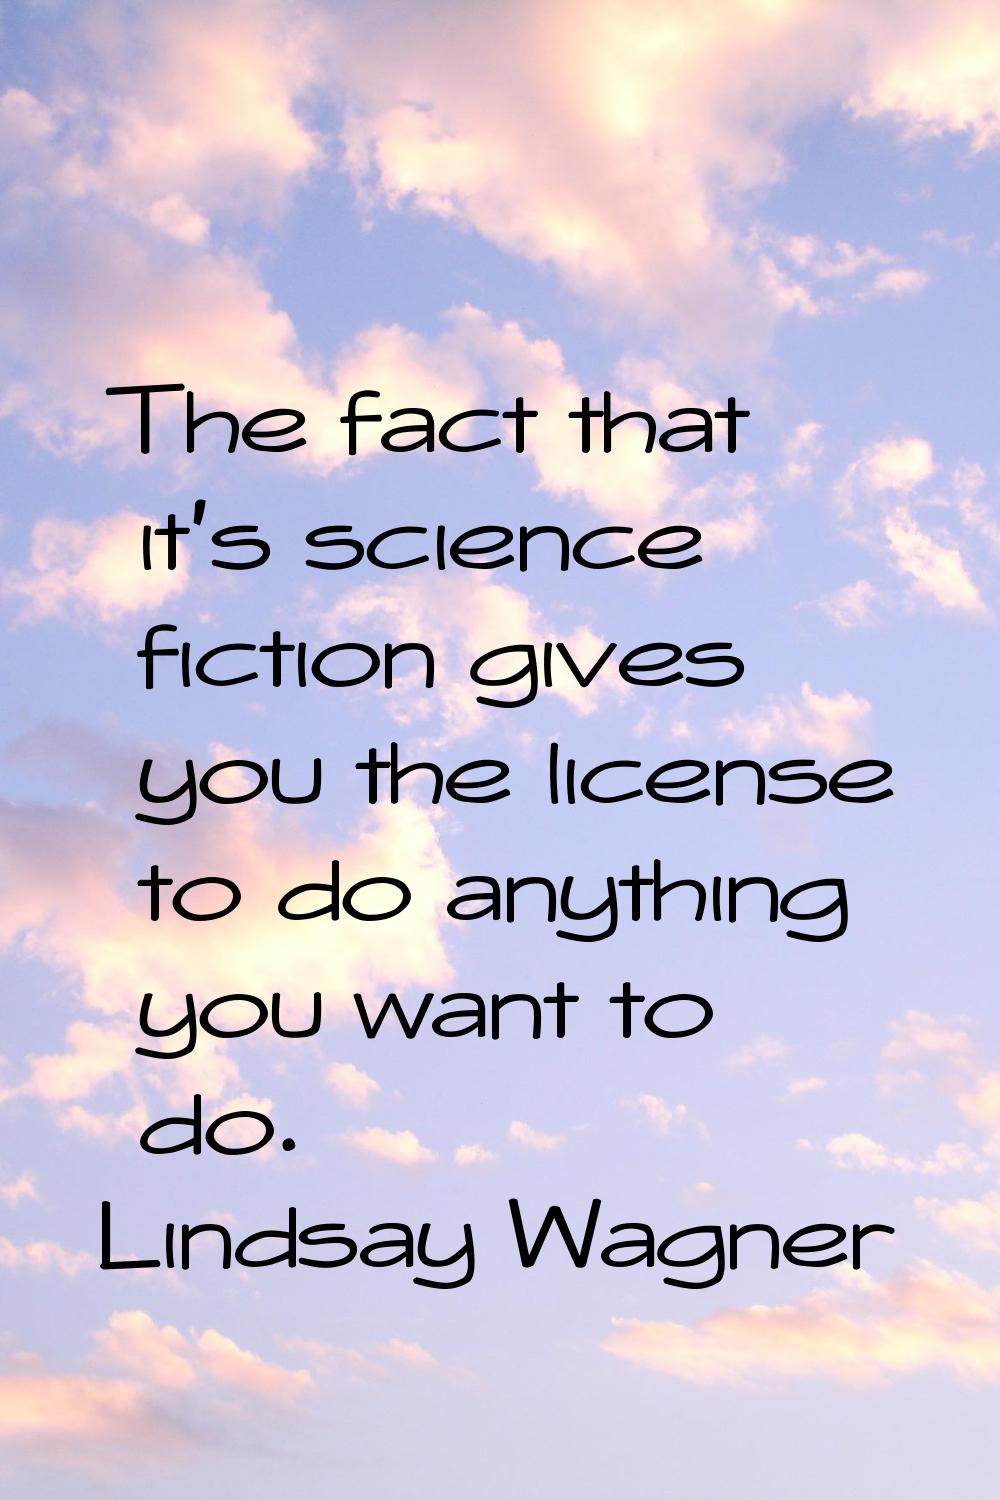 The fact that it's science fiction gives you the license to do anything you want to do.